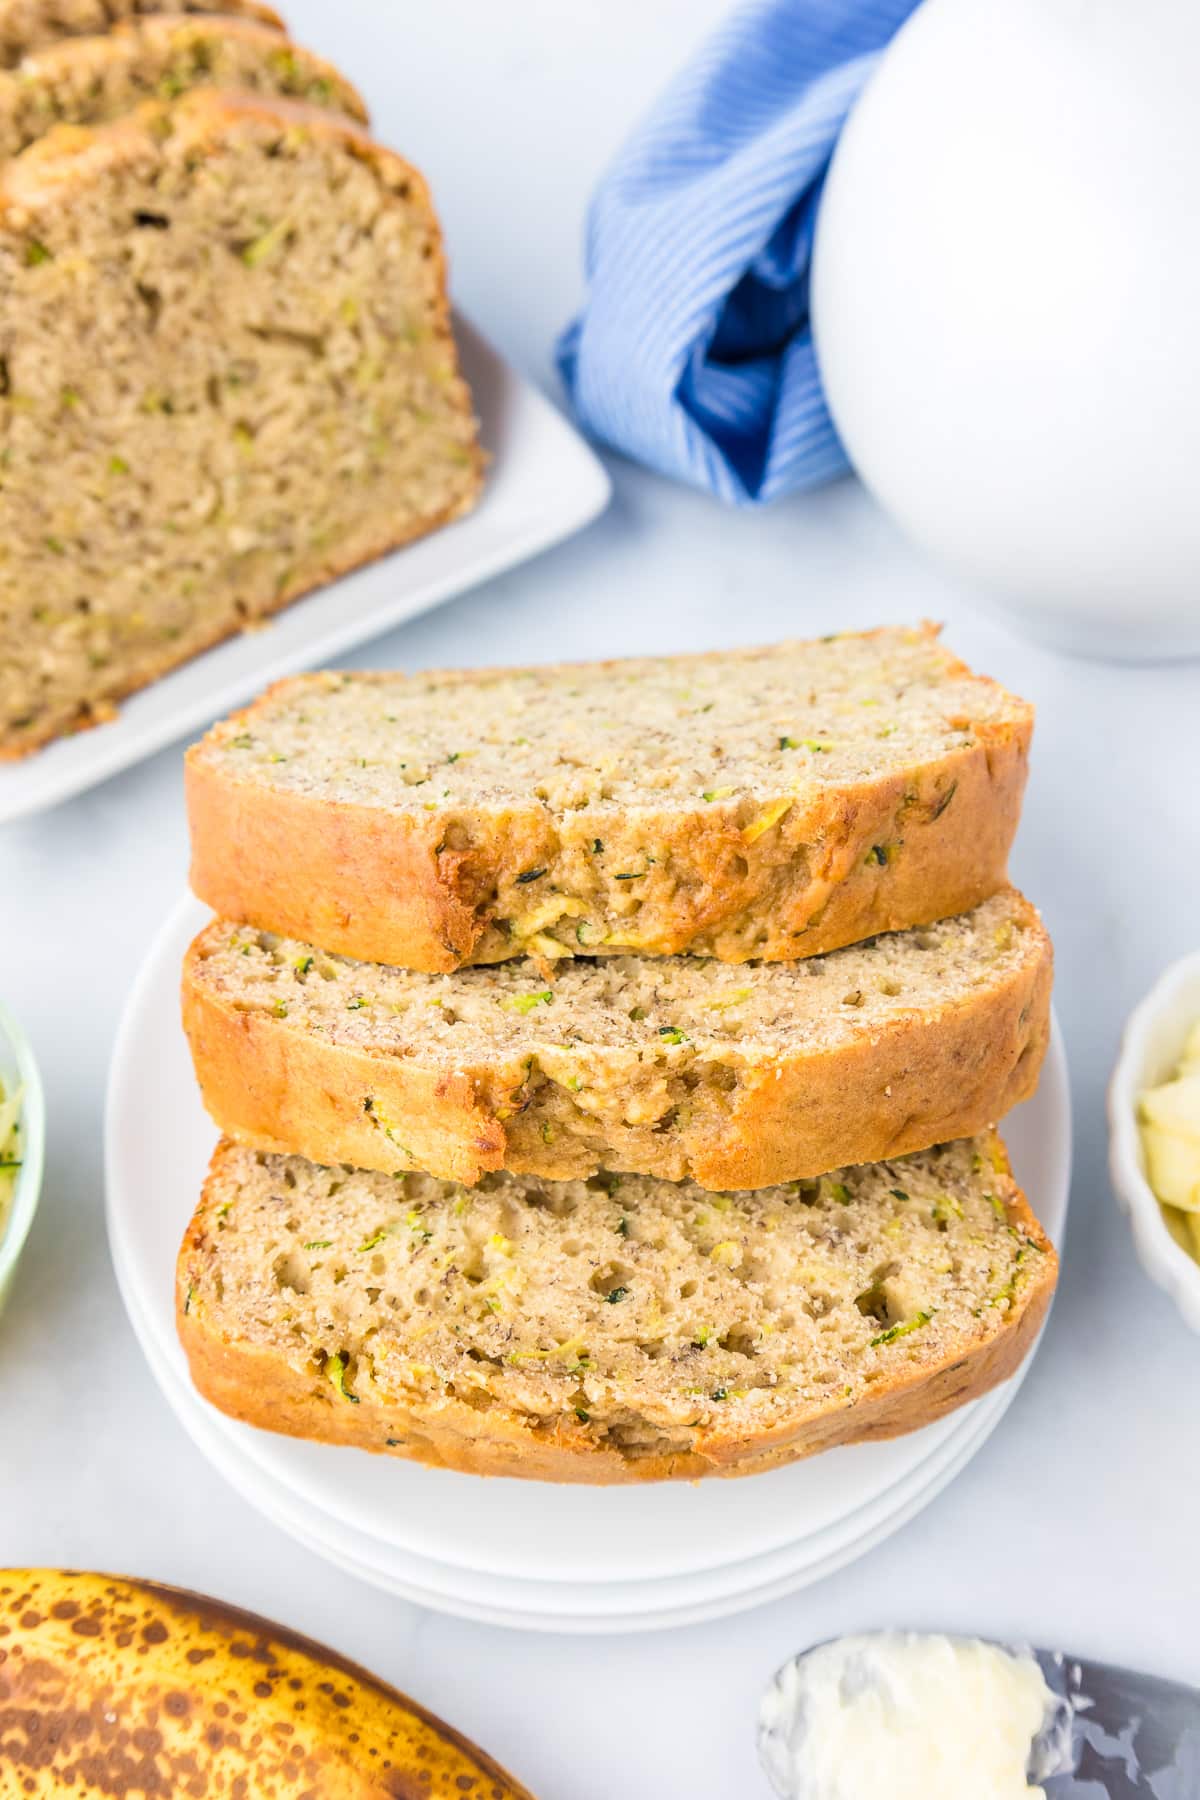 Zucchini banana bread slices on a plate piled high with more on a platter nearby on the counter and other items such as butter and a pitcher nearby.